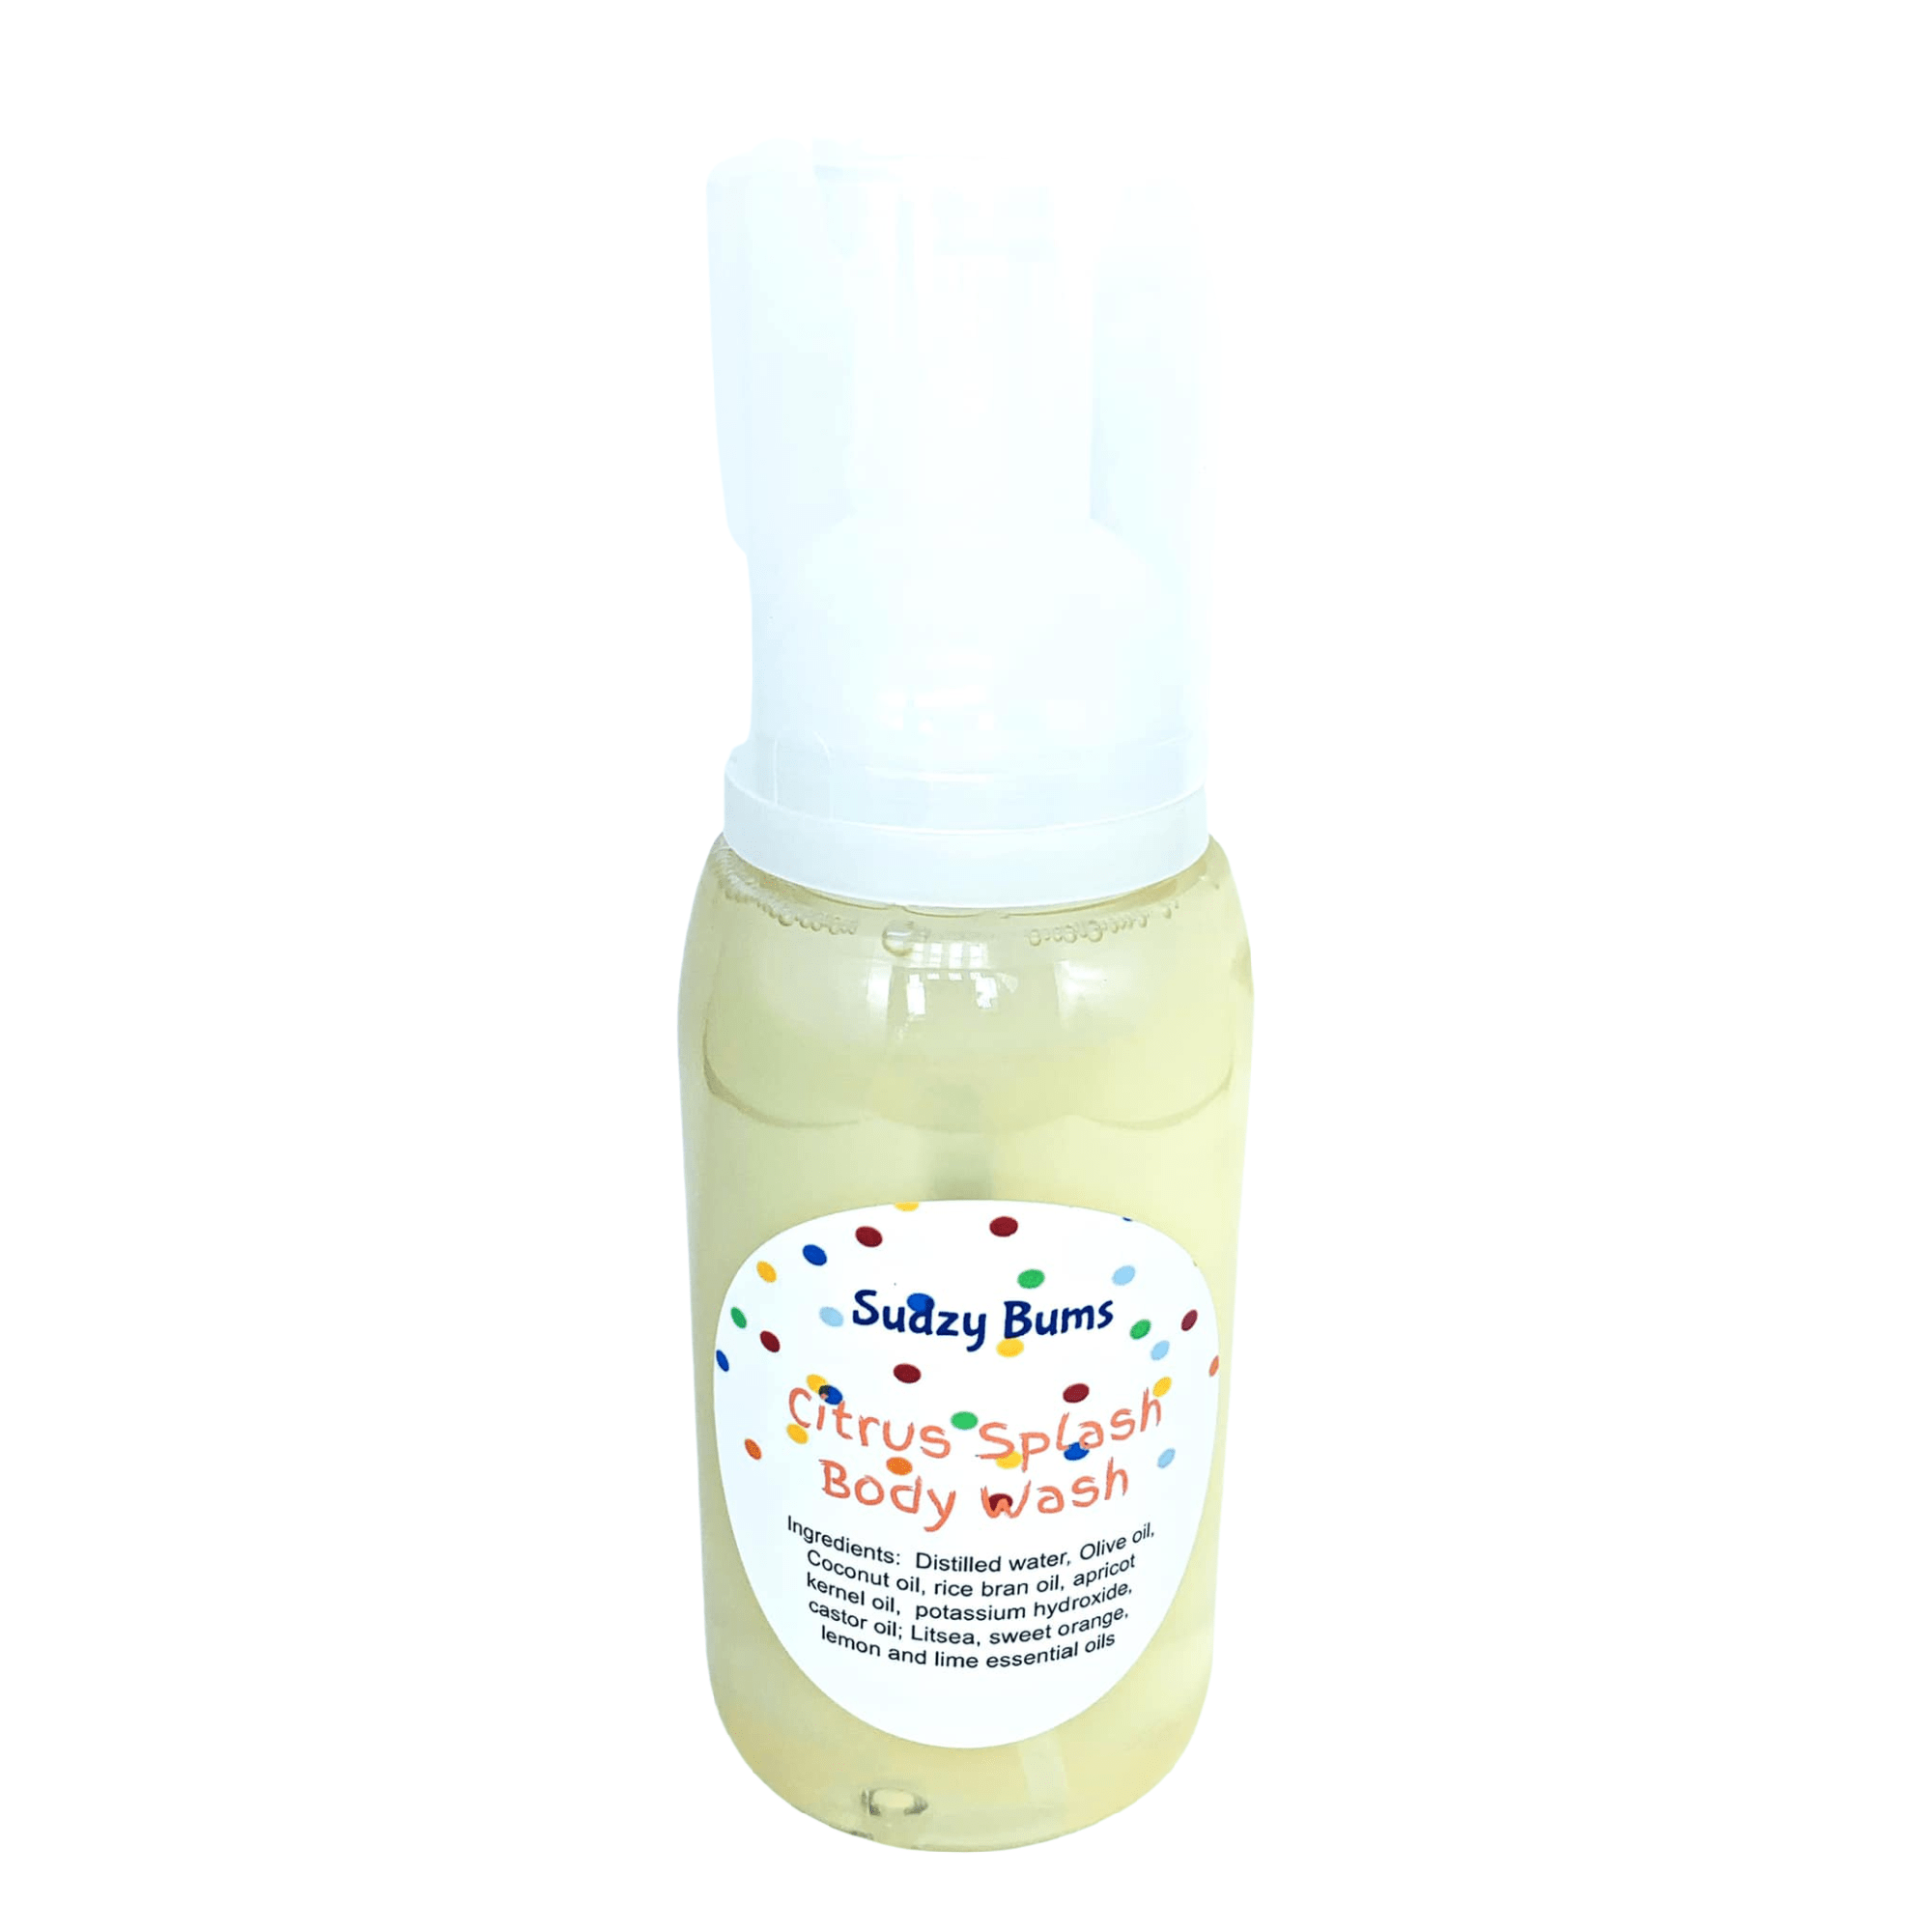 This Kids Body Wash -Citrus Splash is made with love by Sudzy Bums! Shop more unique gift ideas today with Spots Initiatives, the best way to support creators.